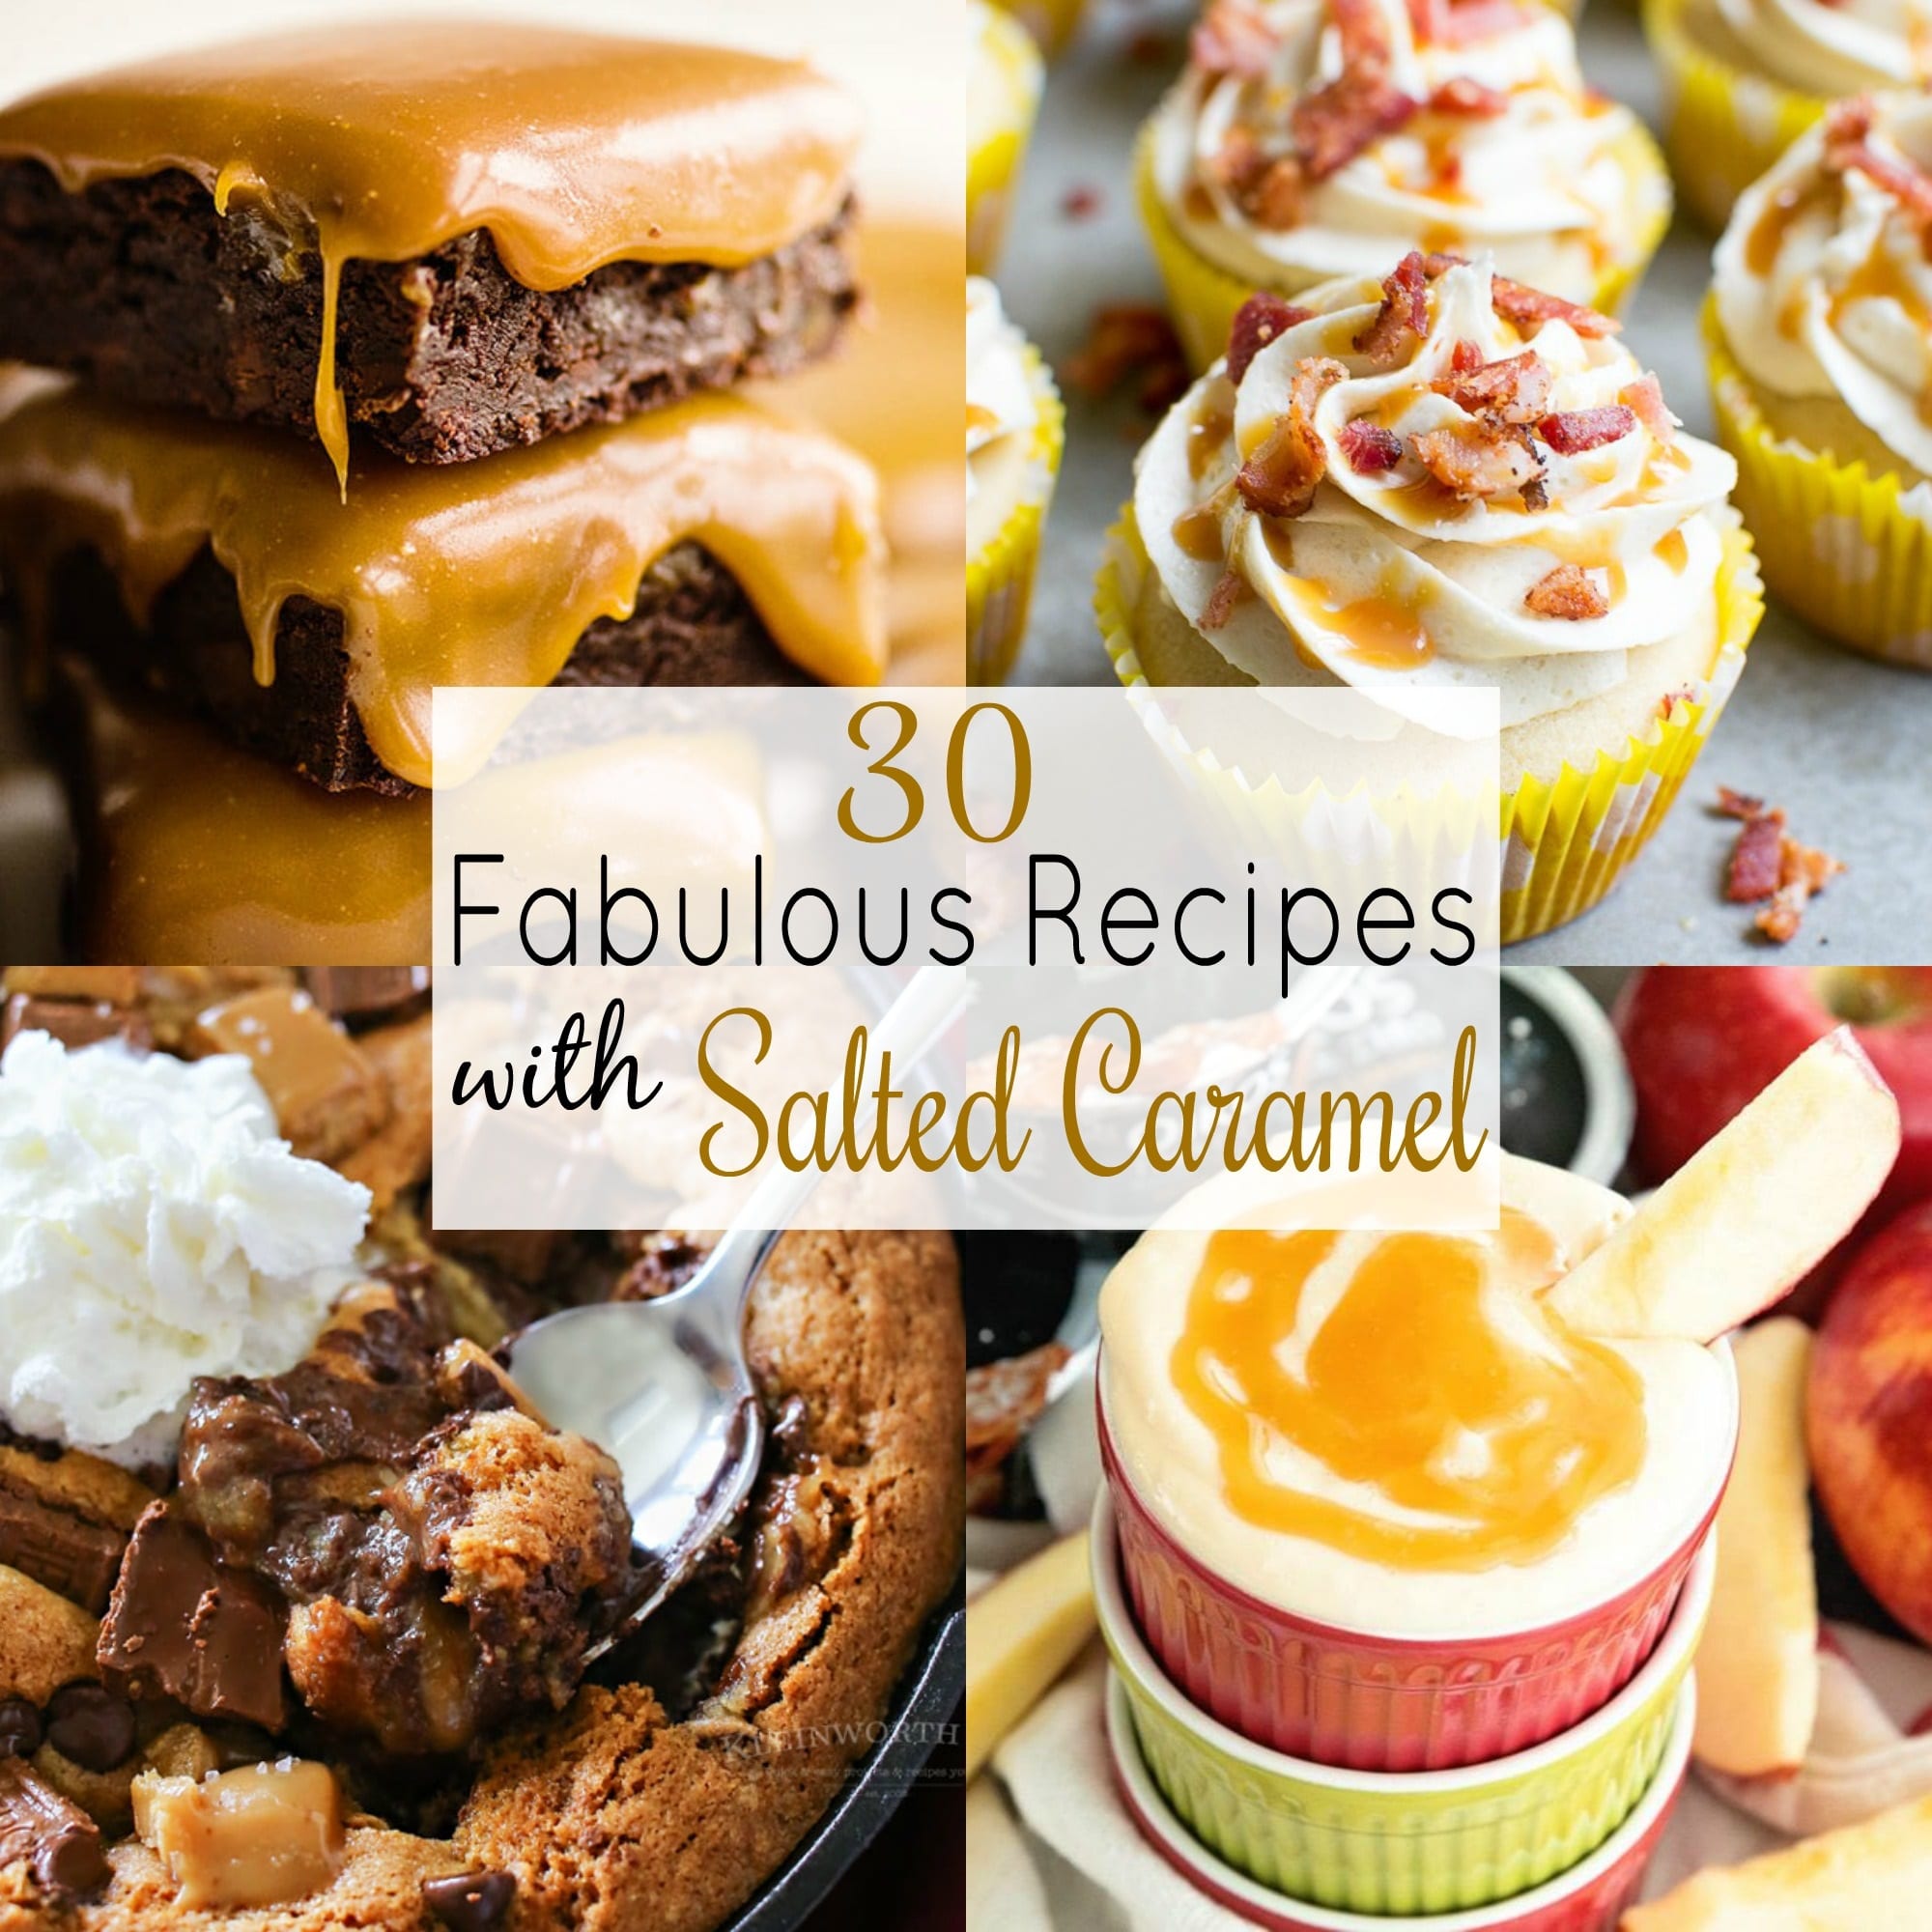 30 Fabulous Recipes with Salted Caramel